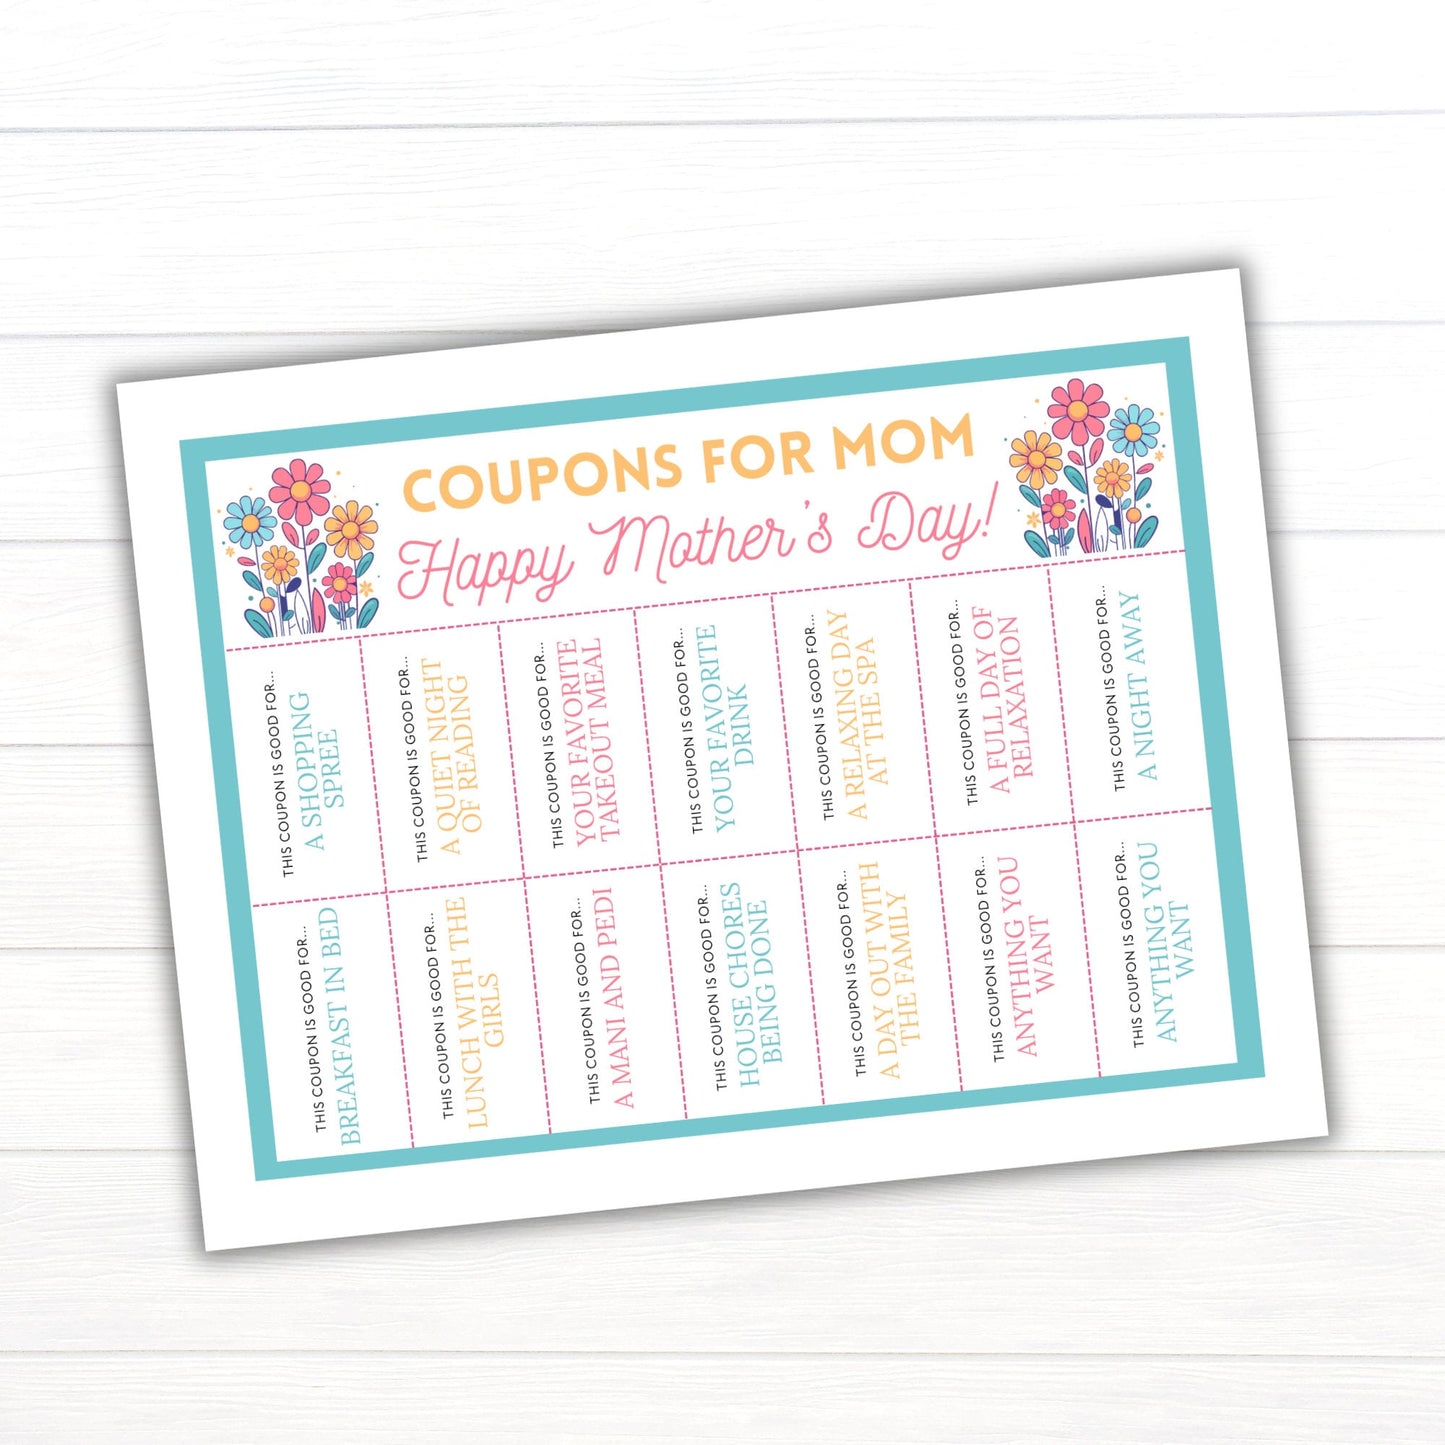 Coupons for Mom, Mother's Day Coupon Pack, Printable Coupons, Mother's Day Printables, Coupon Pack, Coupon Book, Blank Coupons